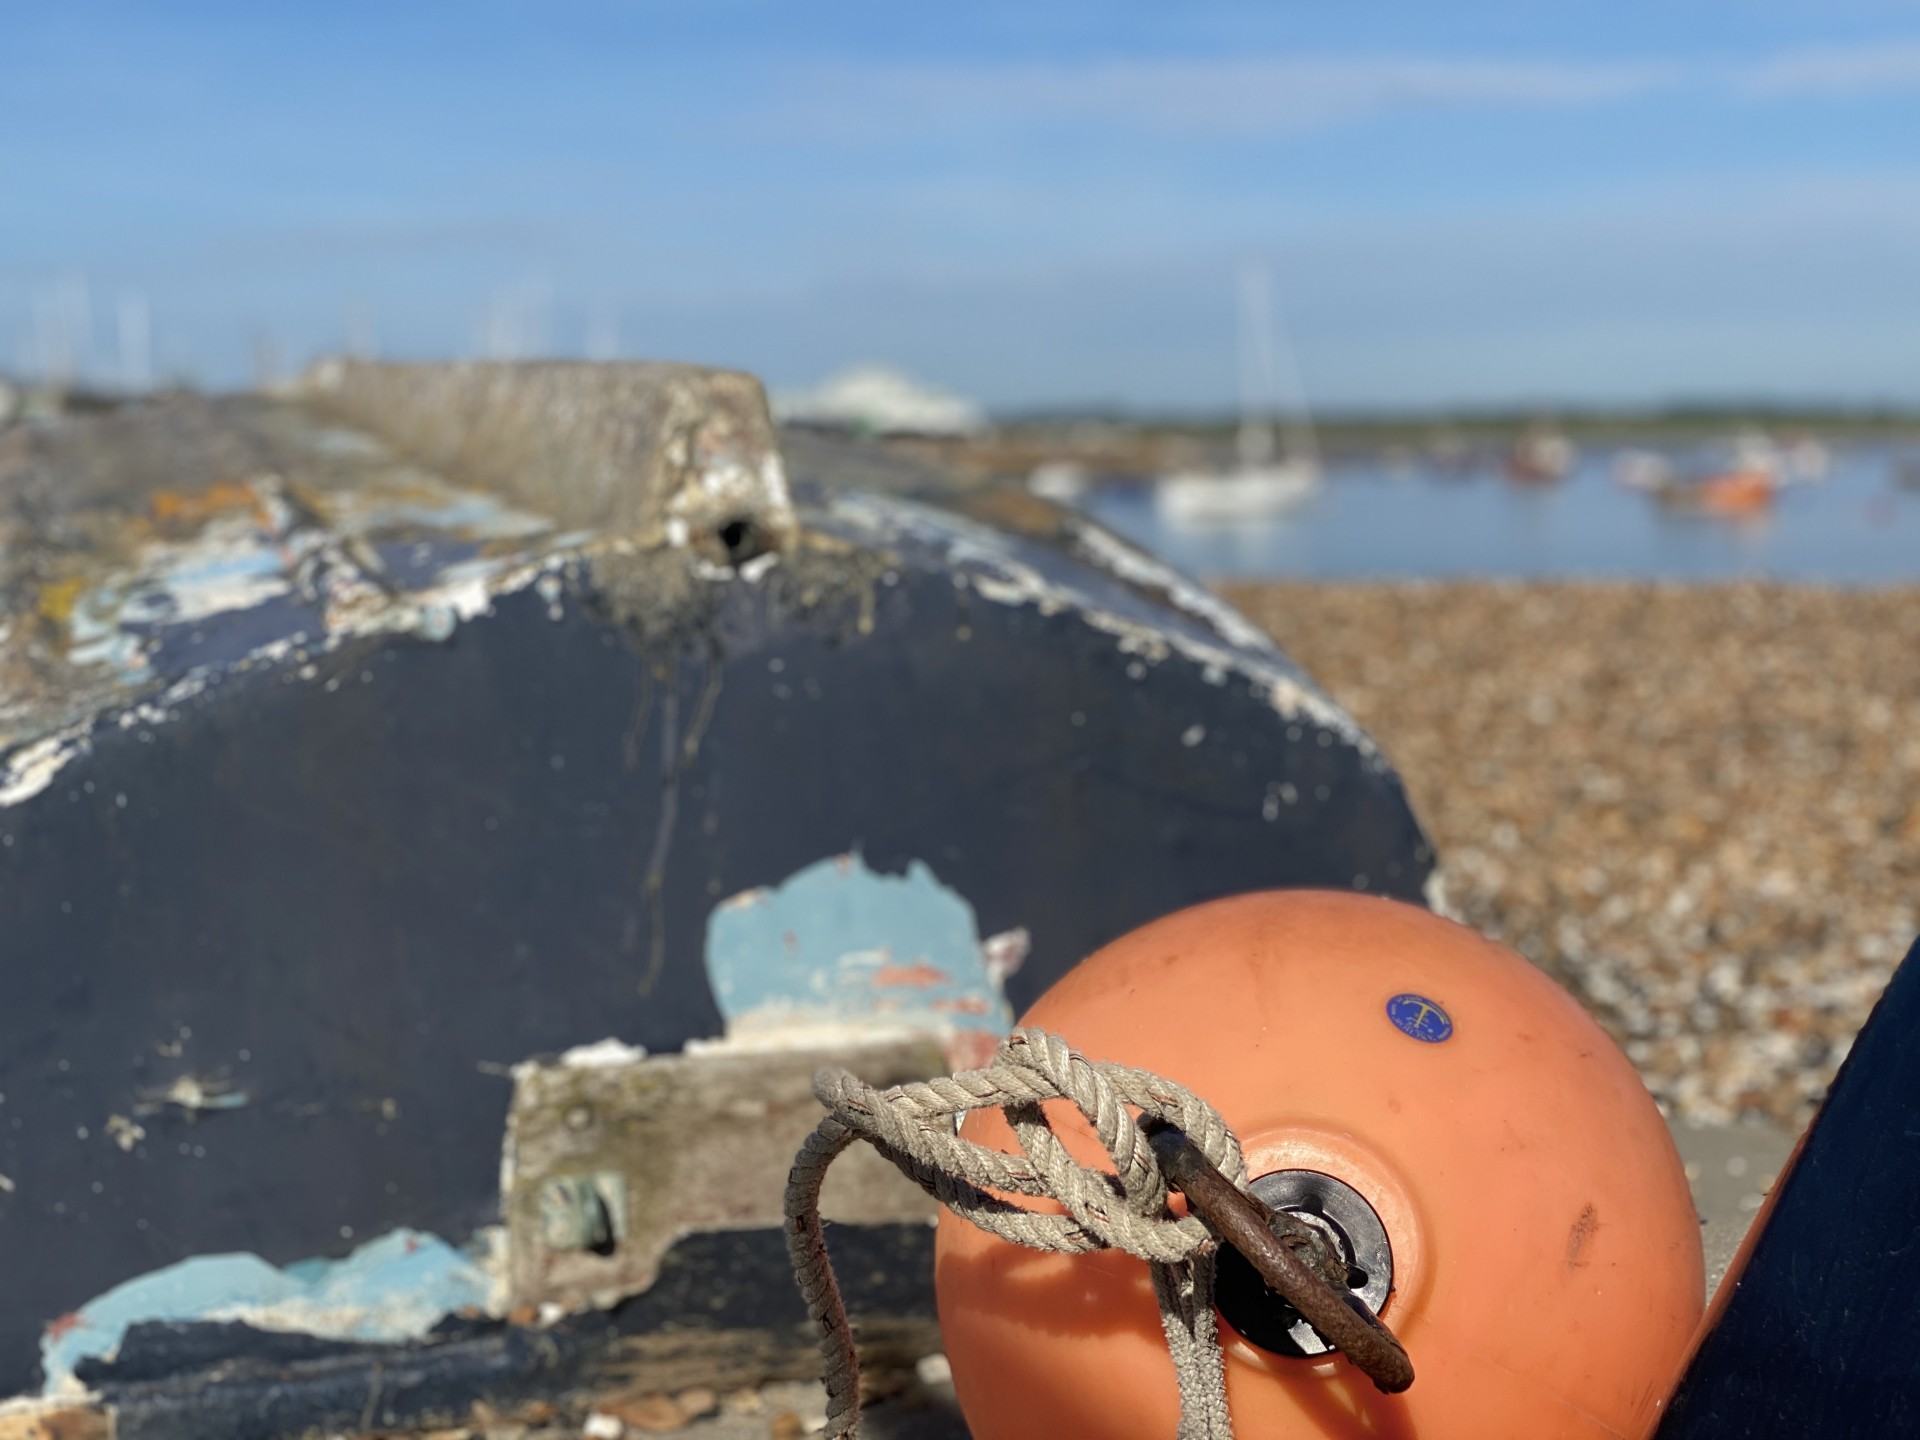 A buoy alongside a dinghy on a Suffolk beach with NOMAD Sea Kayaking.